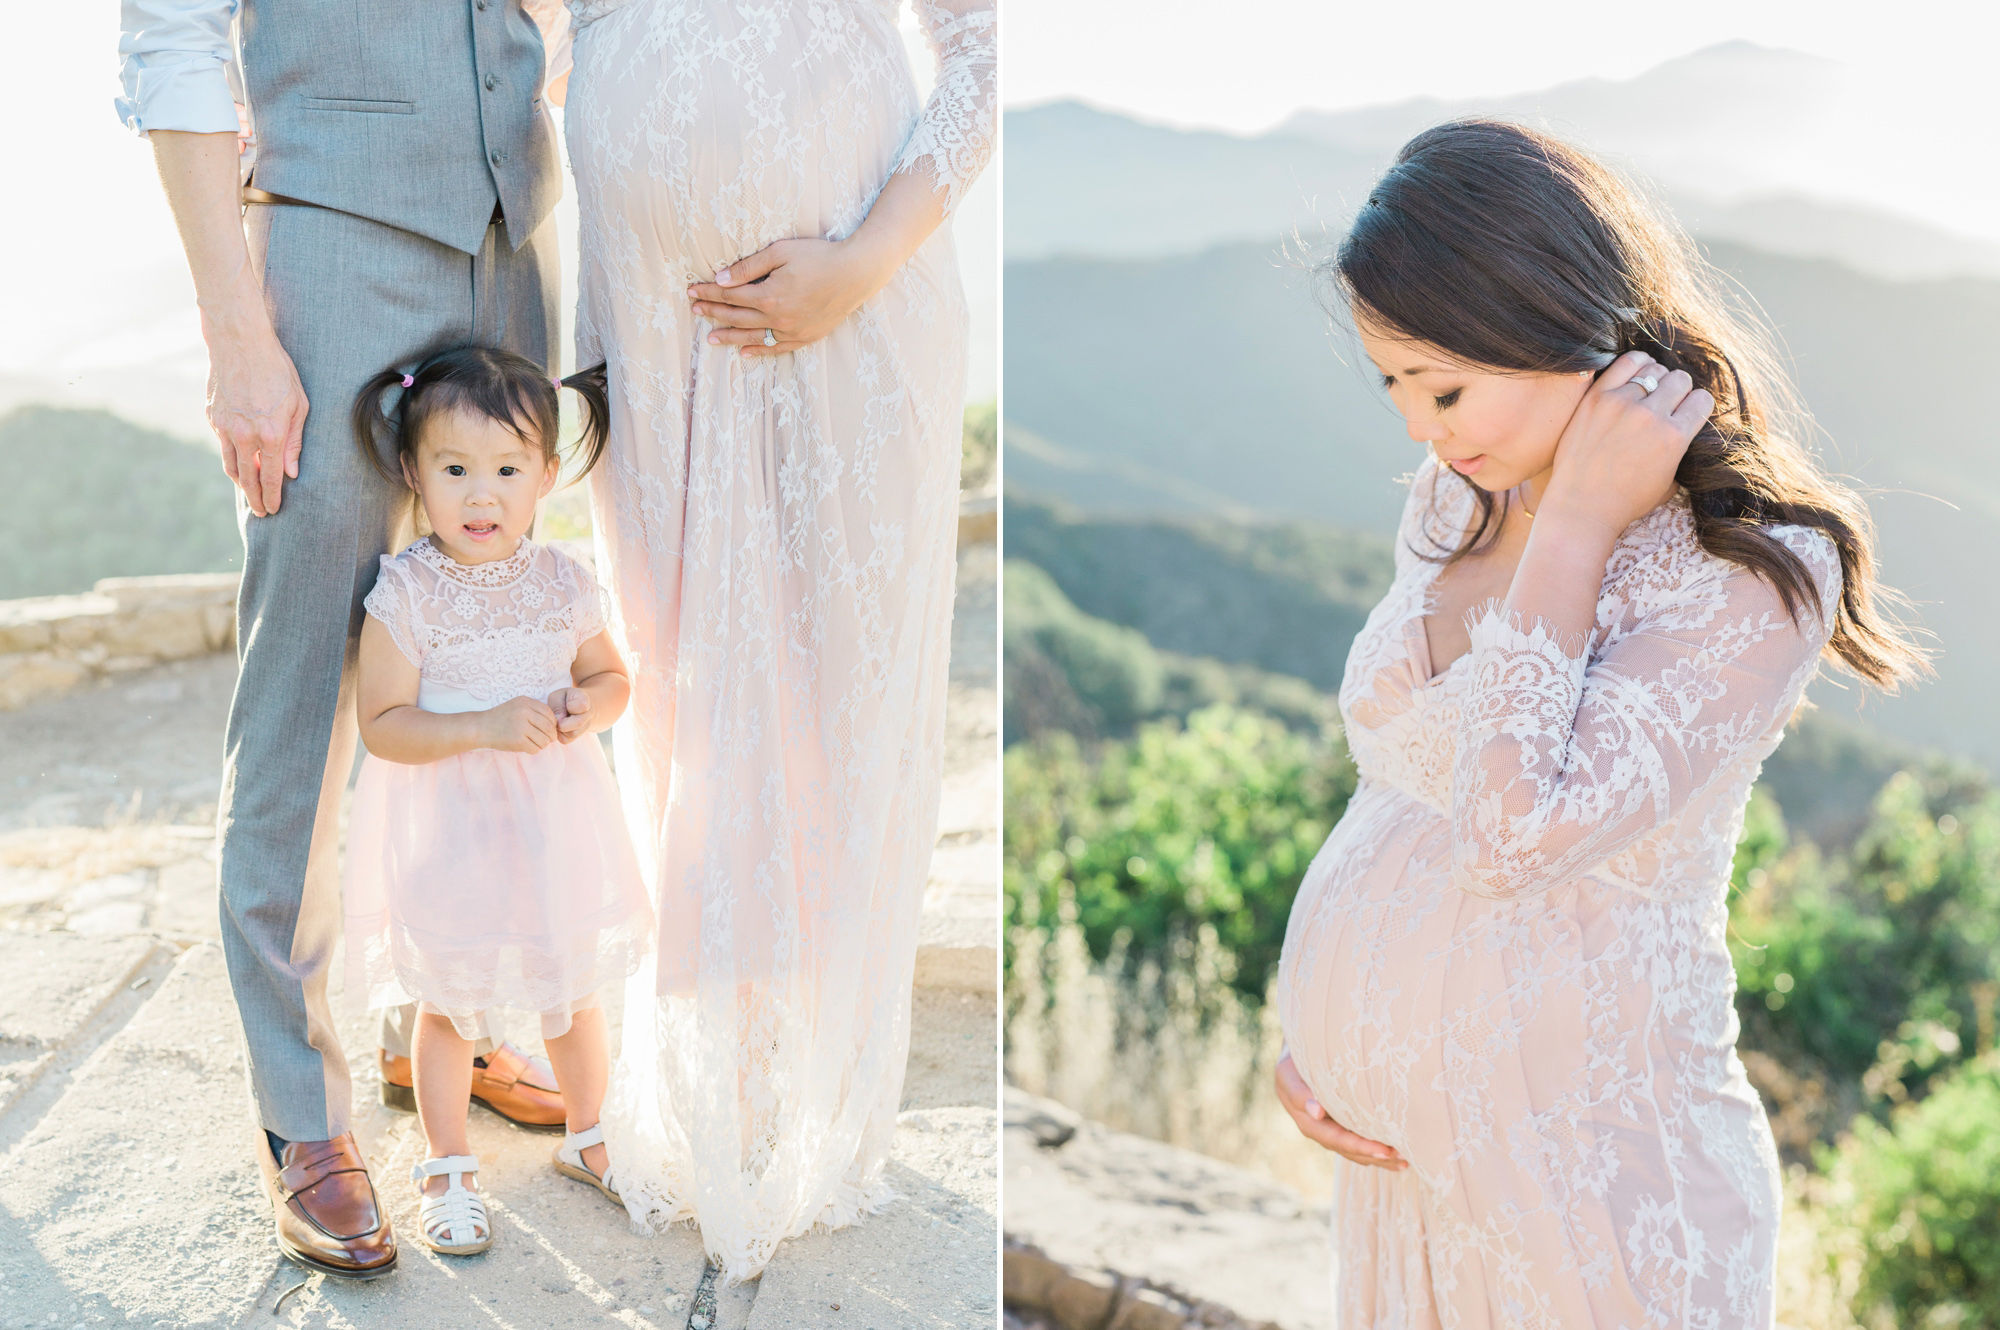 Maternity photography on film by DFW motherhood photographer Tenth & Grace.